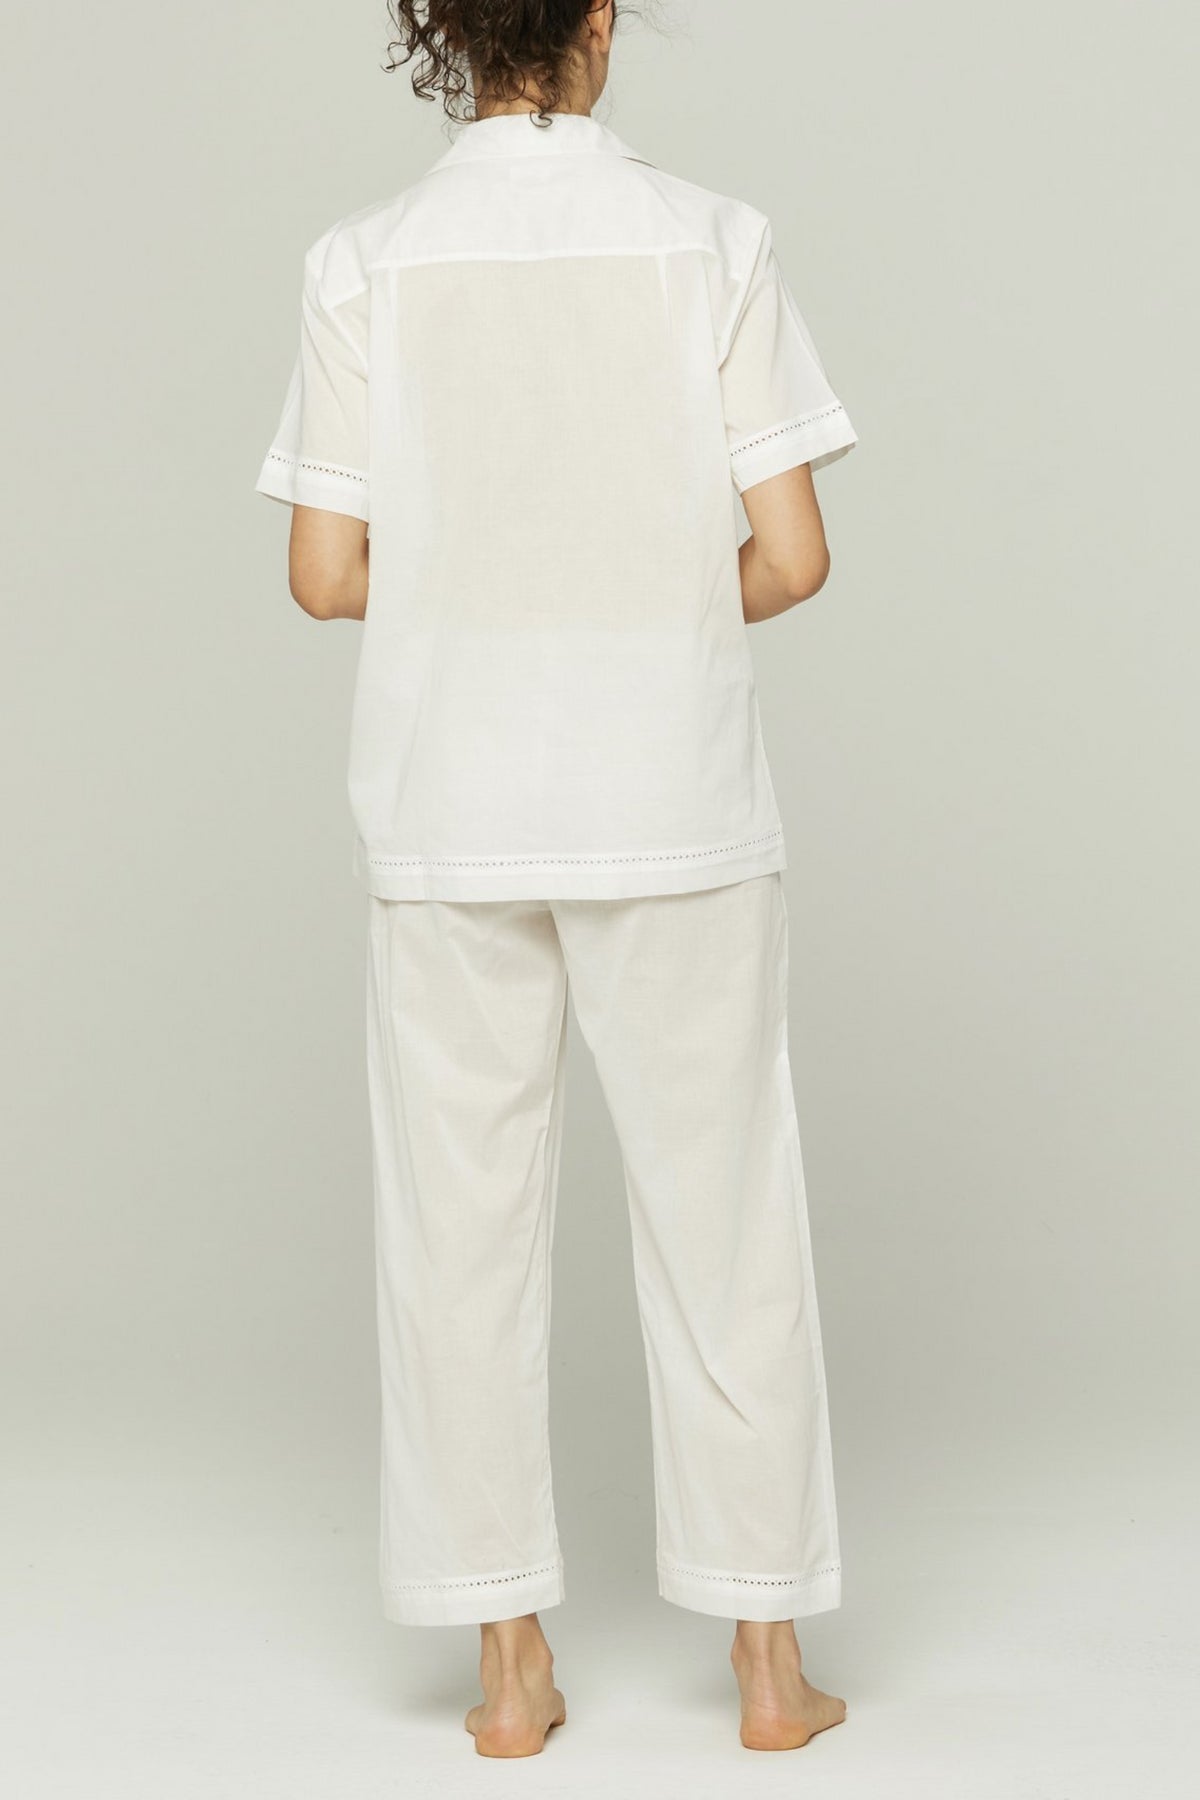 Short Sleeve Cropped Pant PJ Set in White